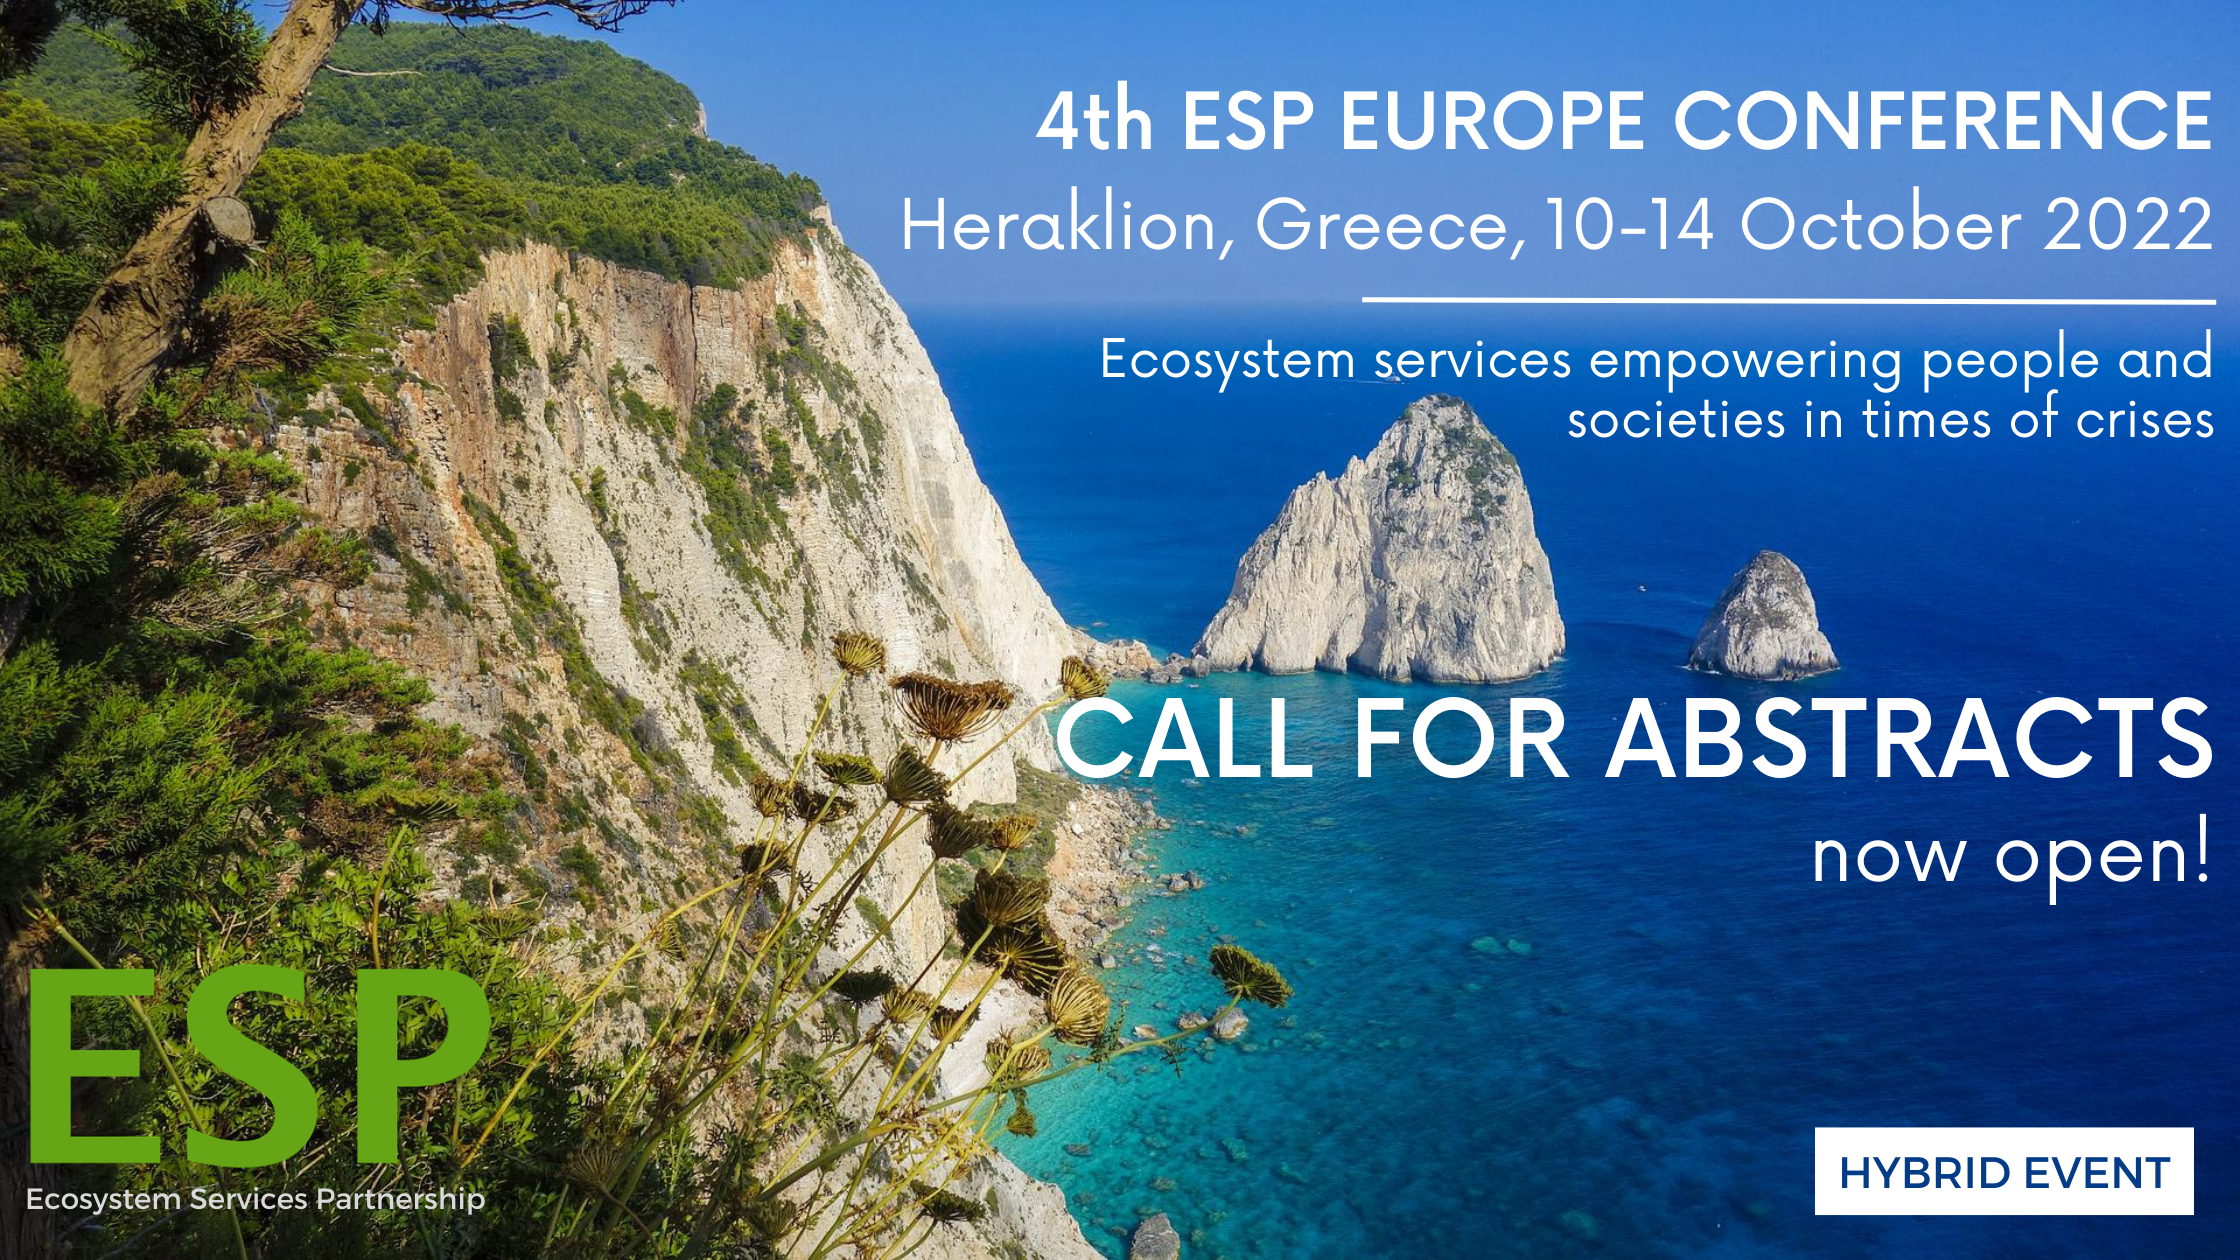 4th ESP Europe Conference: Call for Abstracts